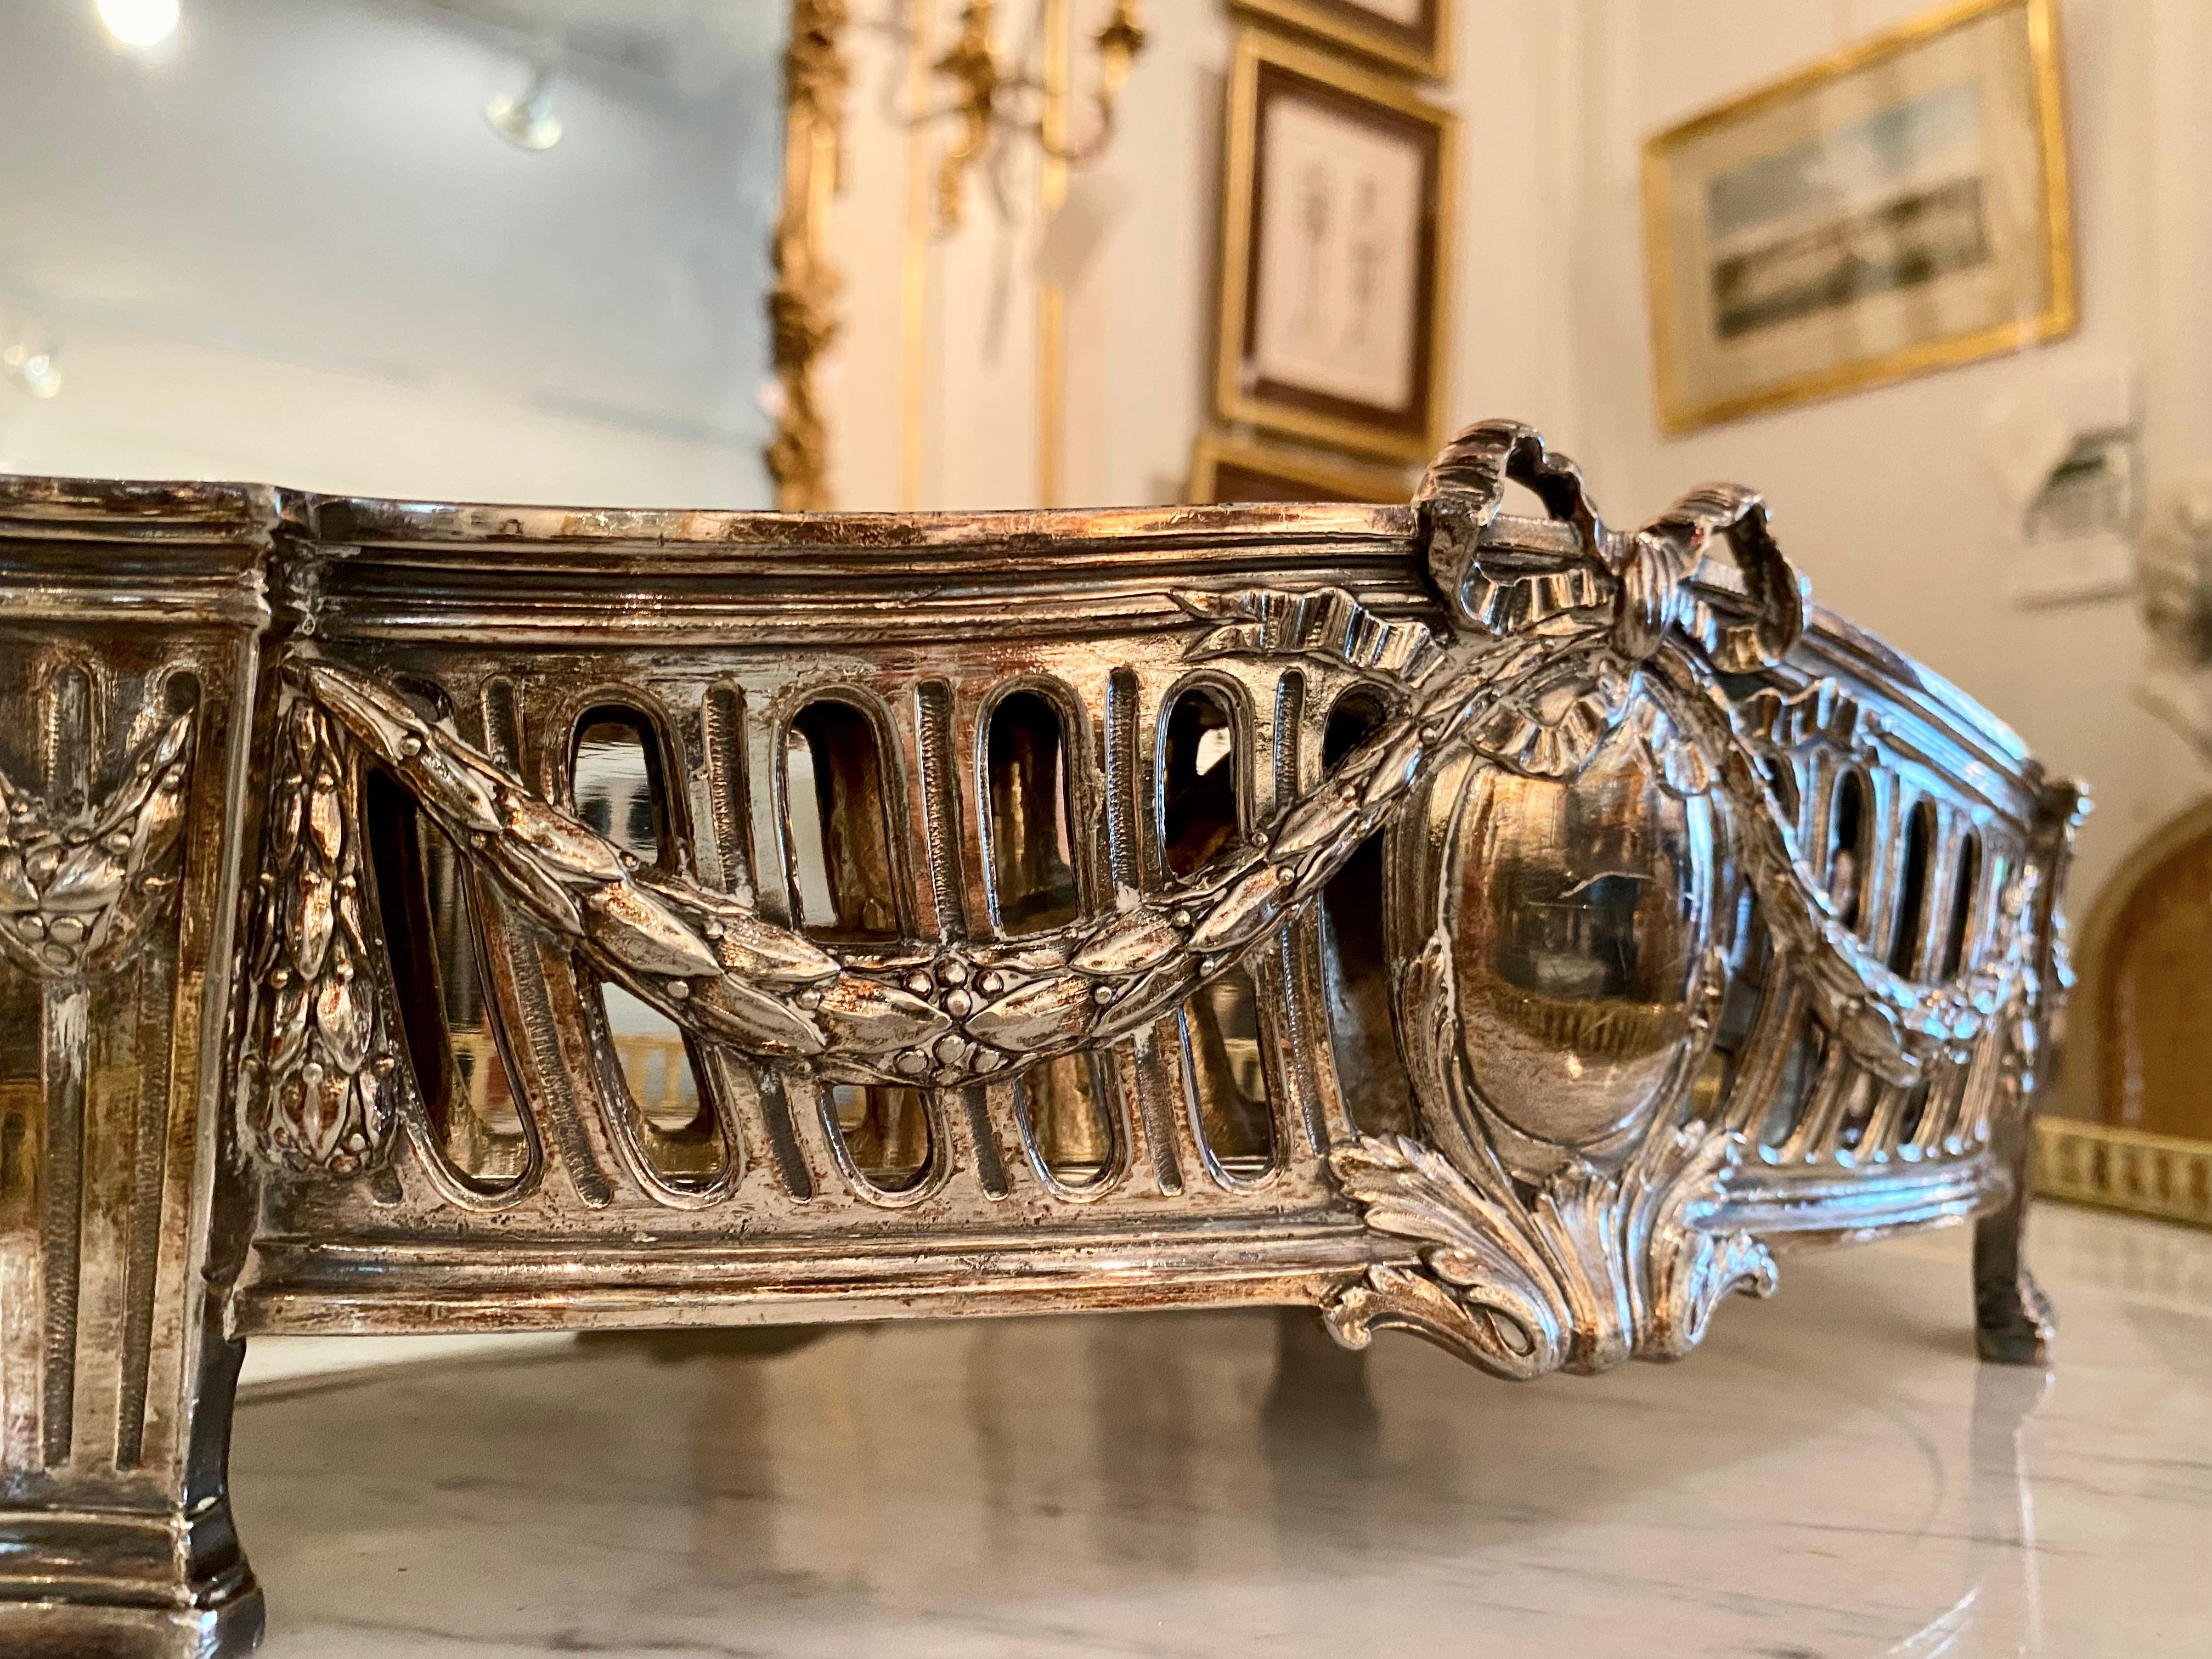 An elegant French 19th century Louis XVI style silvered bronze centerpiece with metal removable insert. The centerpiece is raised on columned feet and adorned in the neoclassical, Louis XVI vernacular, with swags, garlands and bows surrounding an